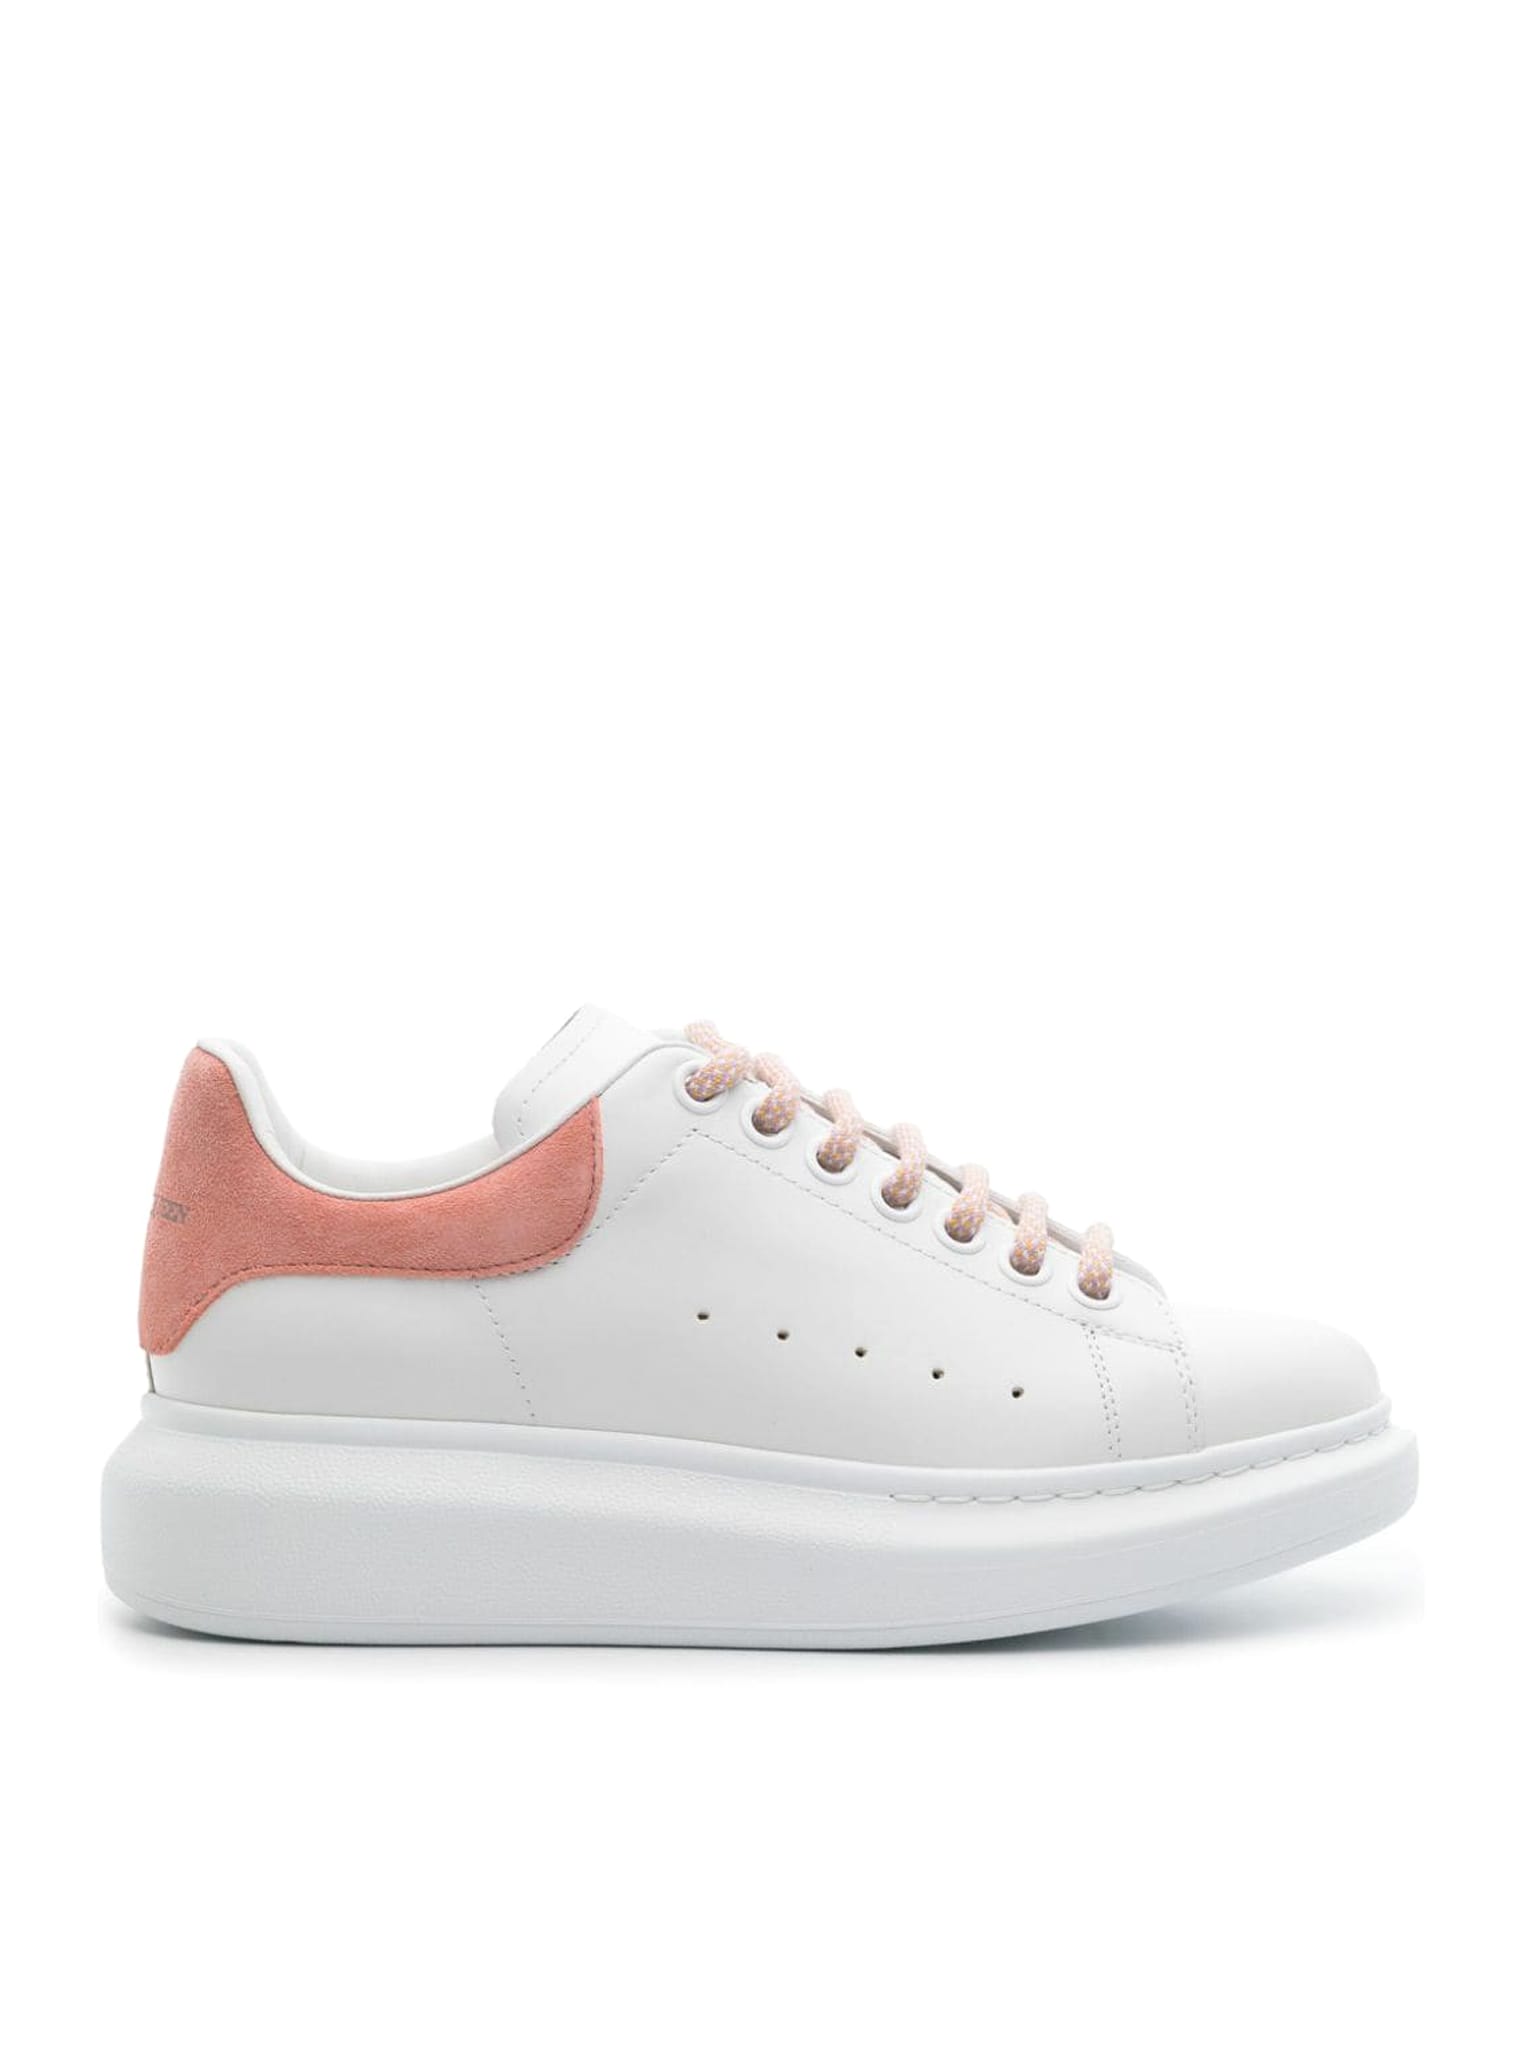 Alexander Mcqueen Trainer Pelle New Tech Calf/new Suede Velour In White Clay